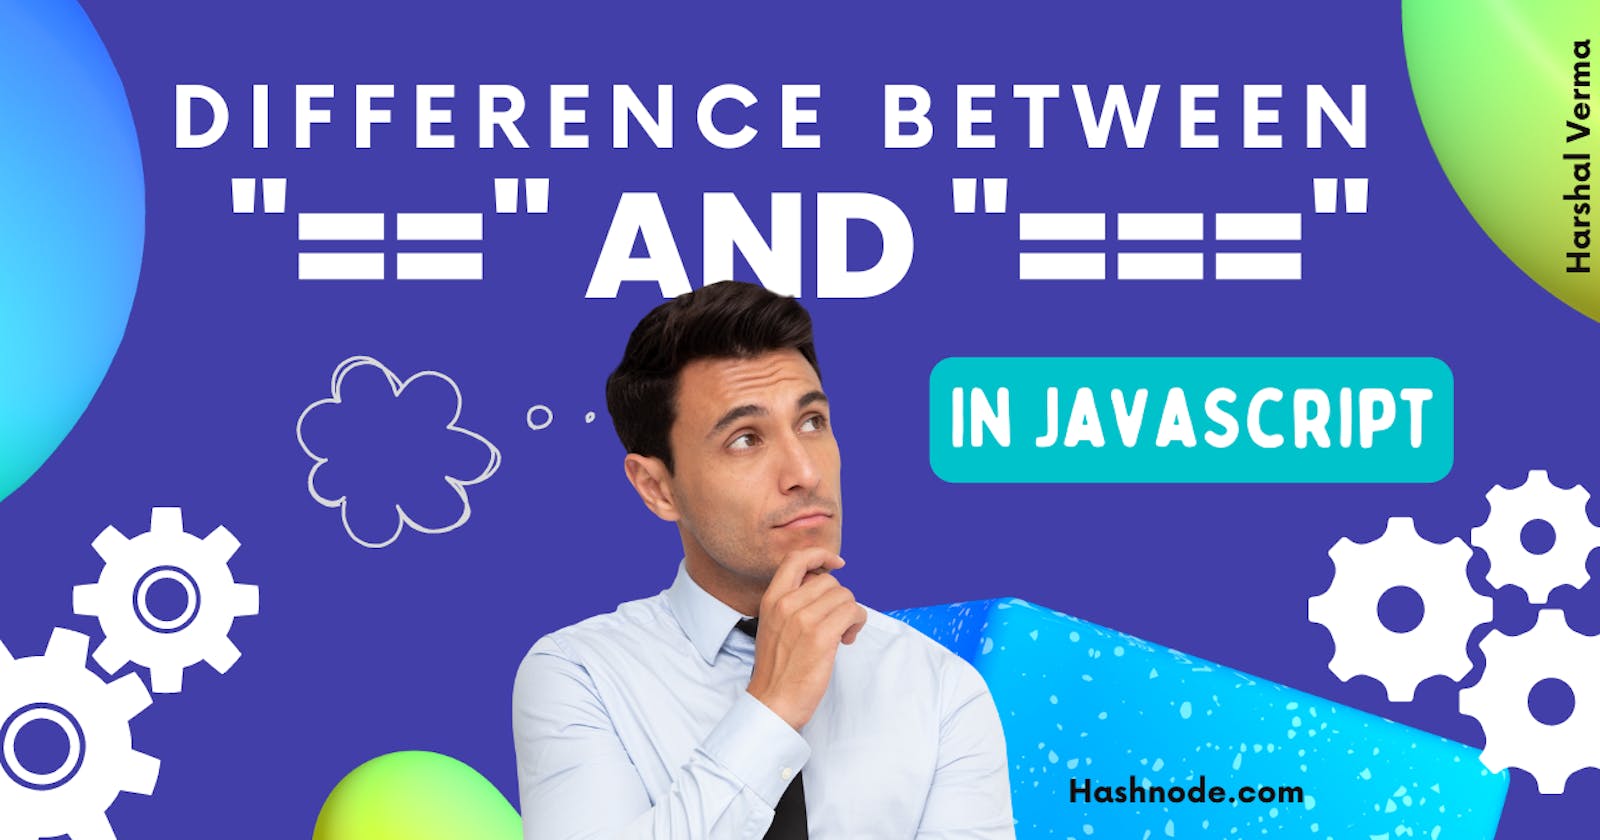 Difference Between “==” and “===” in JavaScript: The Explanation